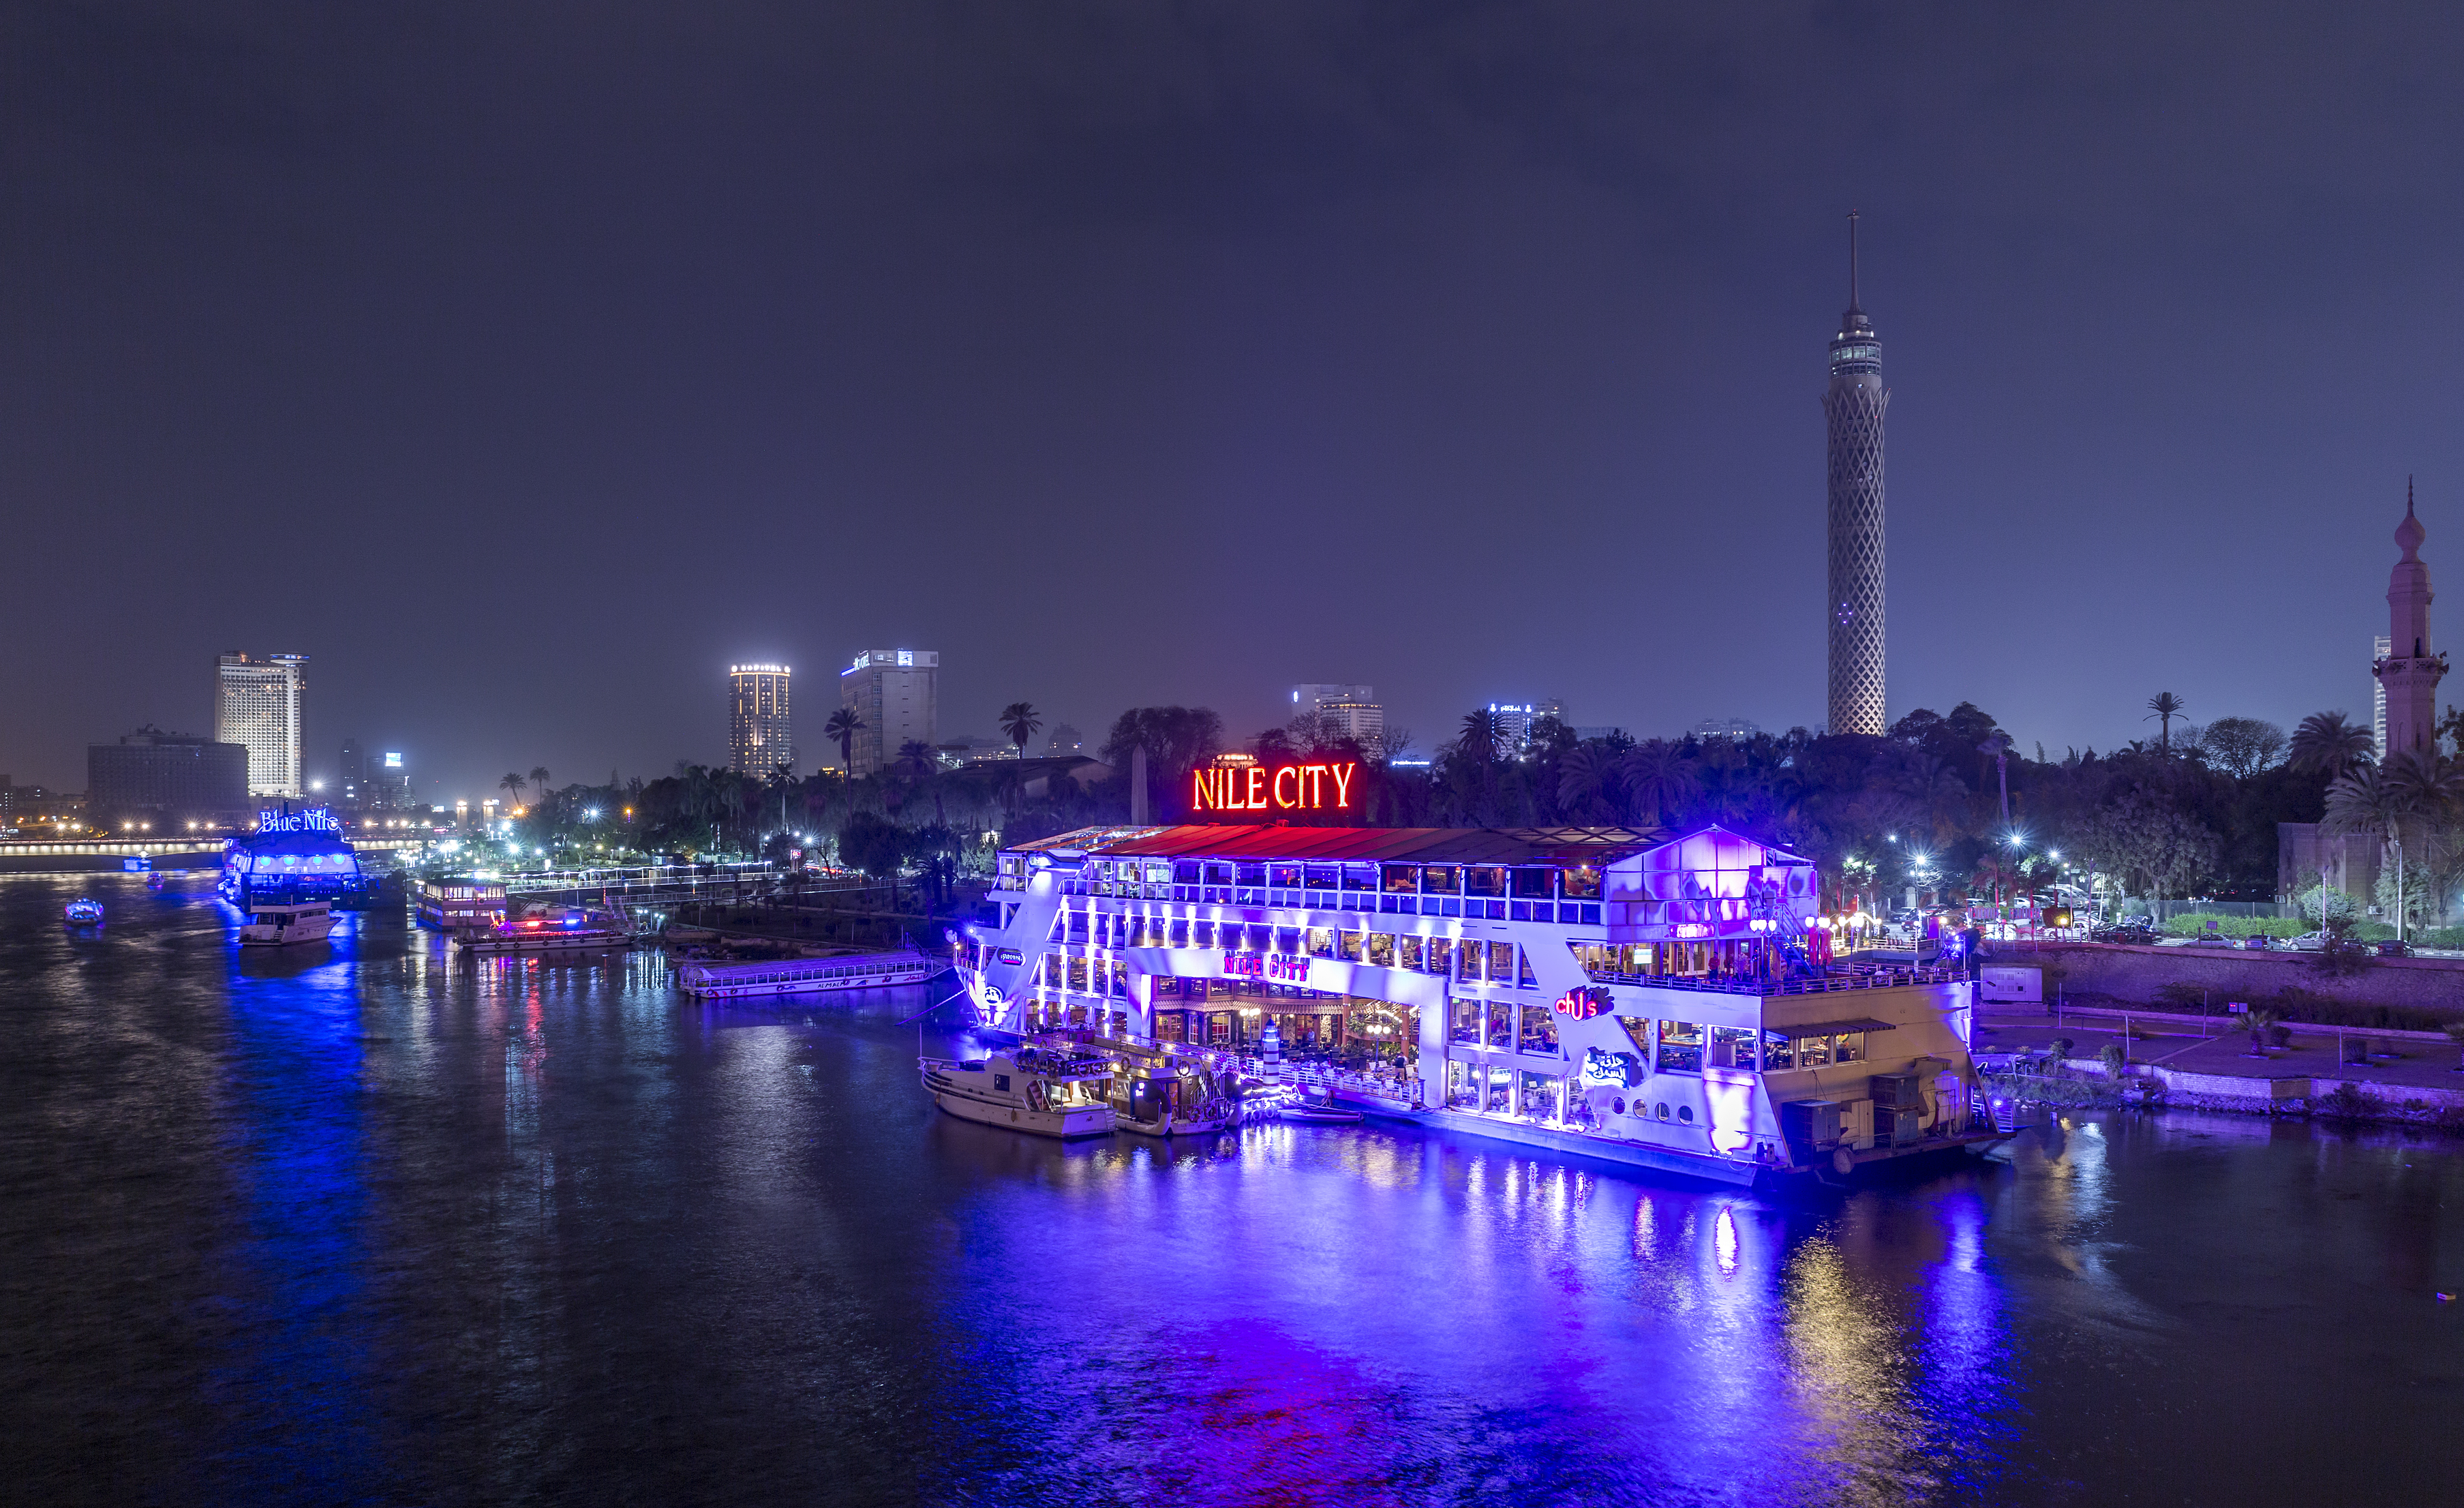 The Island of Zamalek in central Cairo at night, with it's famous boat restaurants on the Nile river.